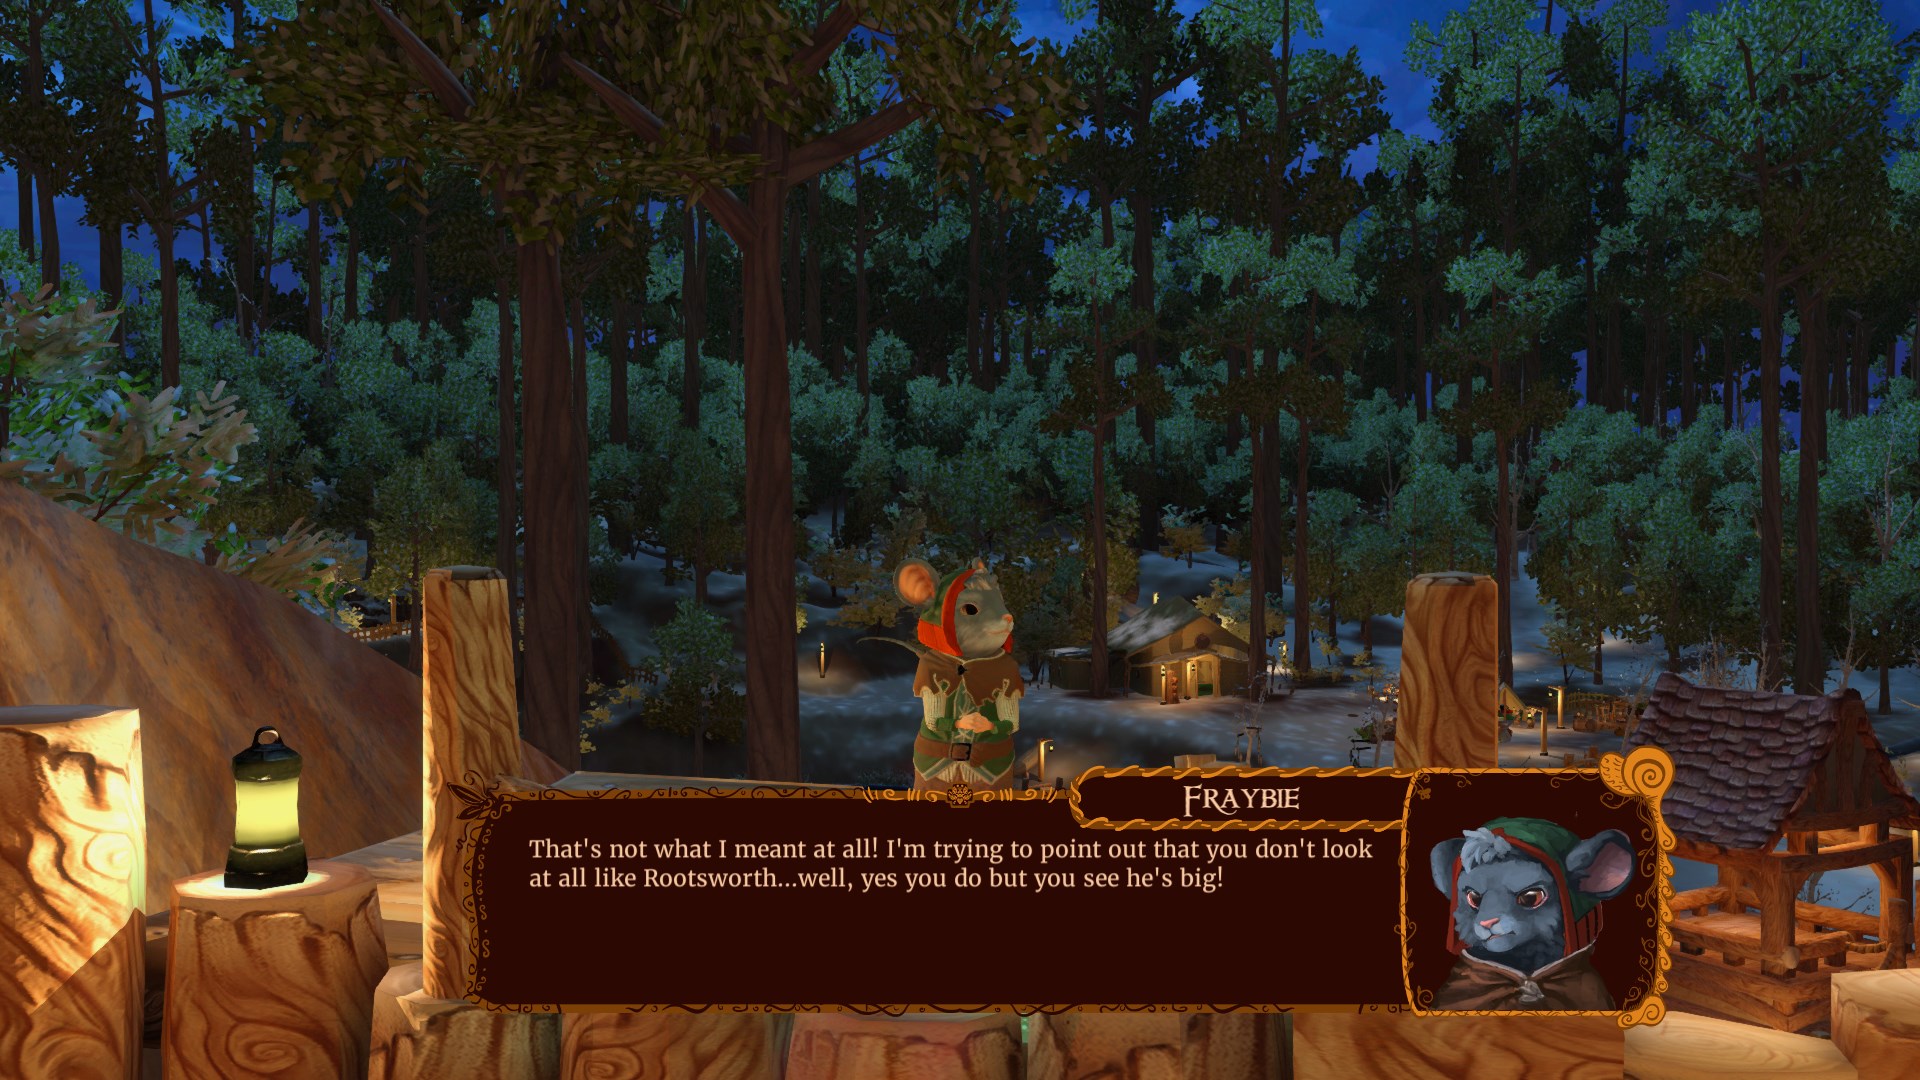 The lost legends of redwall. Рэдволл игра на ПК. Lost Legends игра. The Lost Legends of Redwall Xbox.